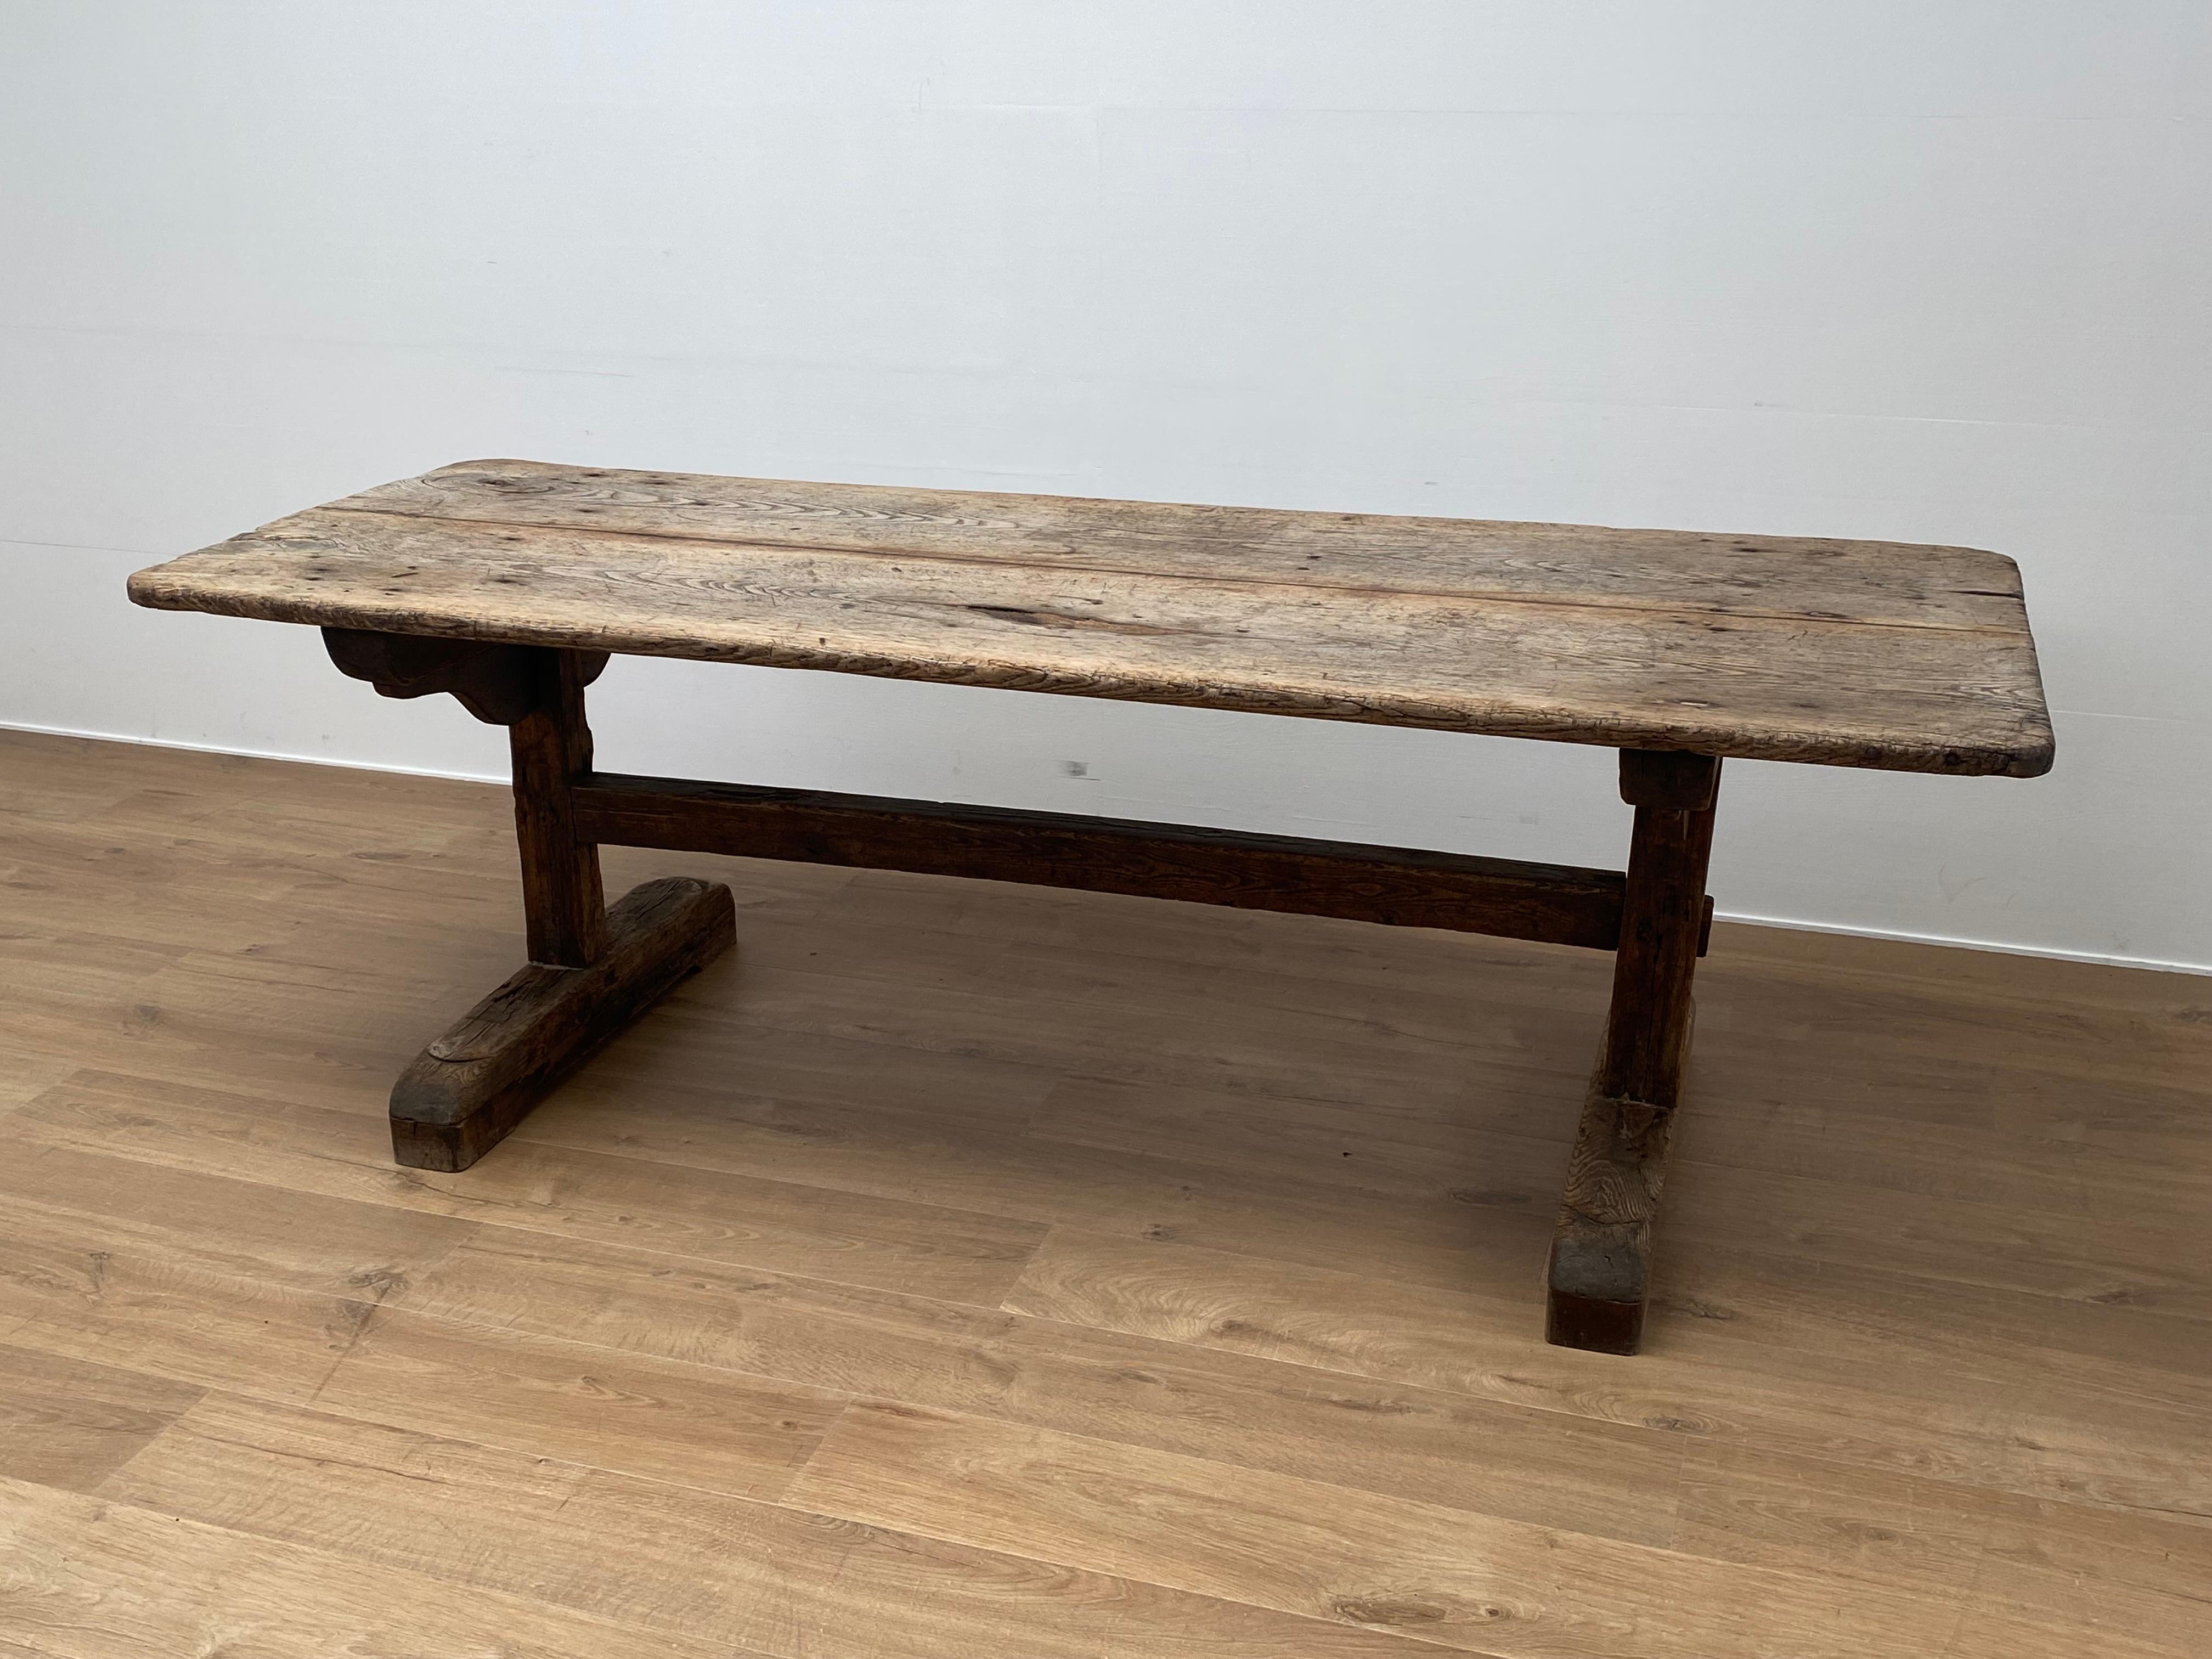 Beautiful French antique Brutalist Farm Table in a Blond Oak Wood,
good shine and patina of the wood,
table on two block feet connected with a stretcher,
can be used for different purposes; as desk as a kitchen table or as a console.